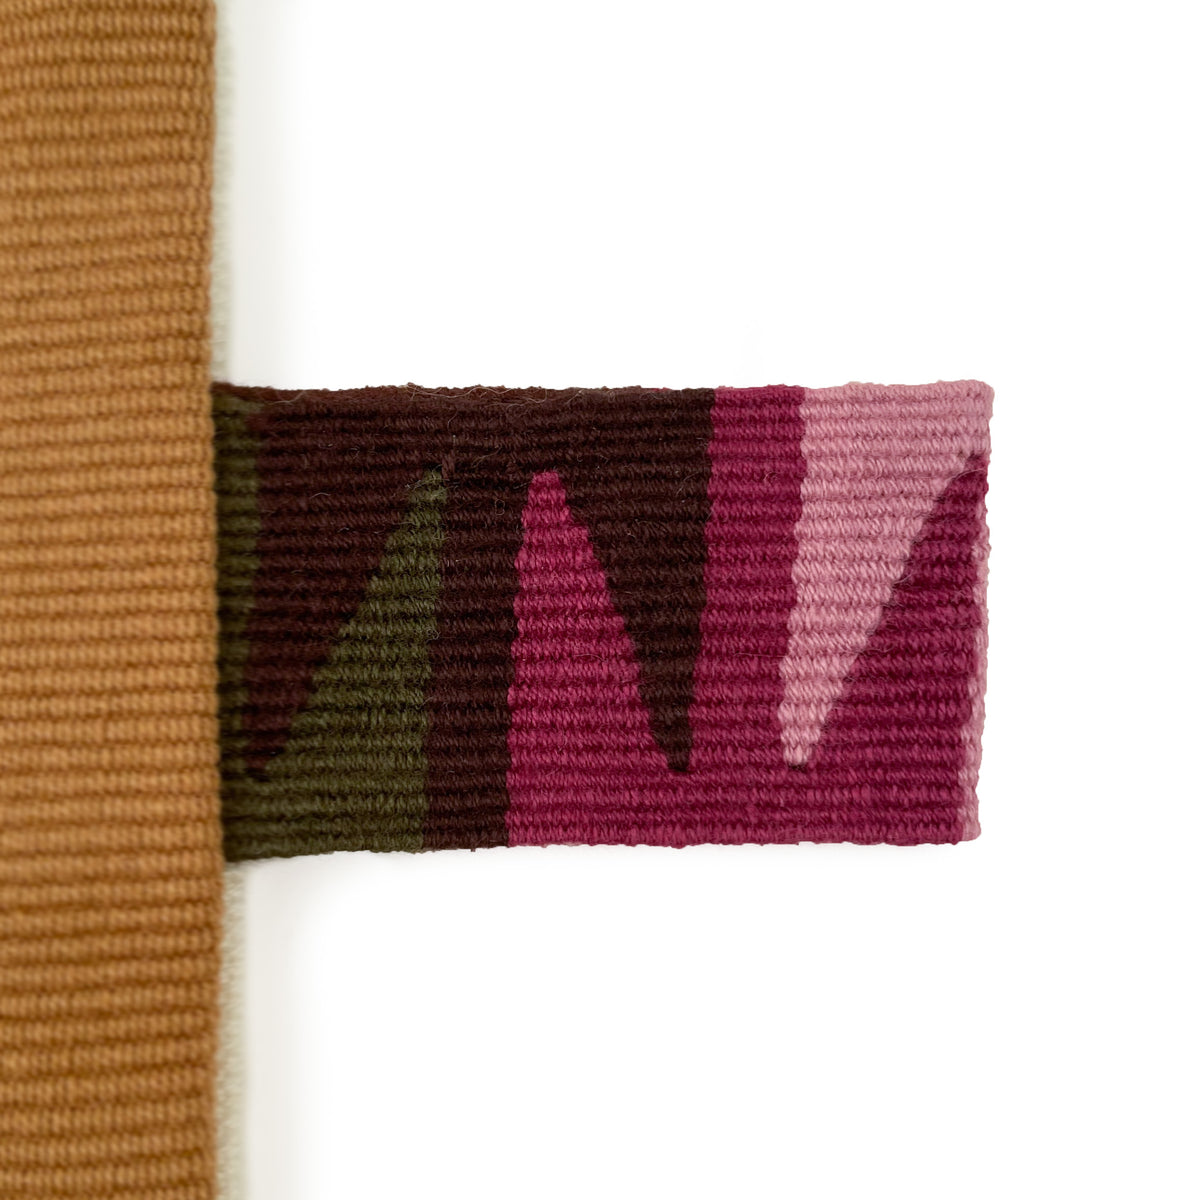 Closeup of handwoven cinta tag in green, brown, and shades of pink